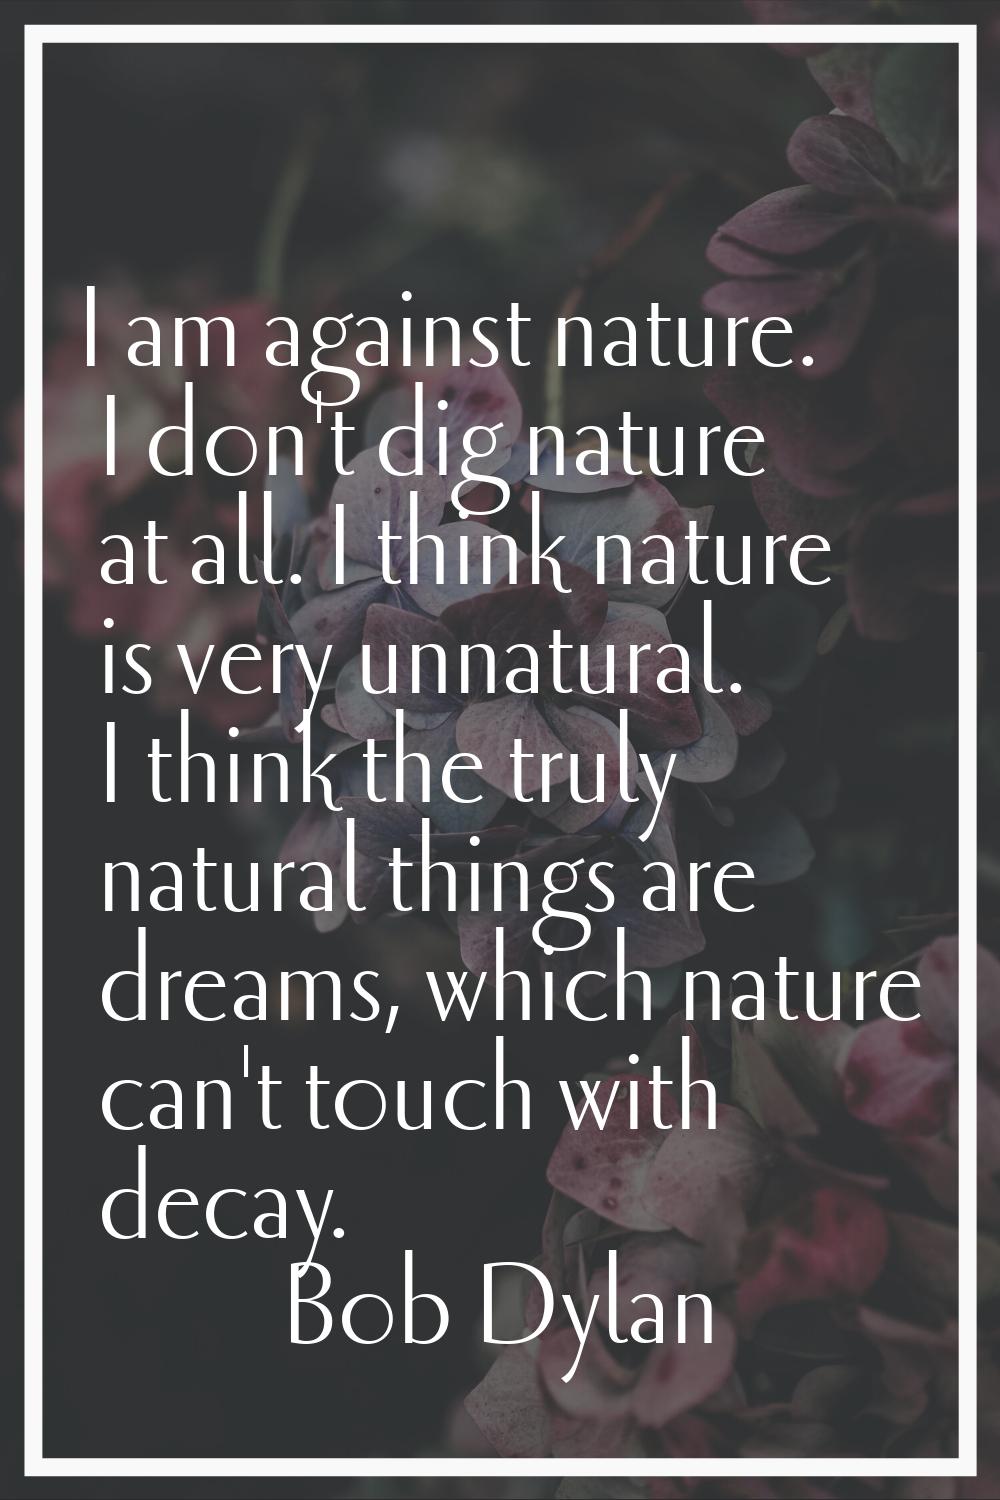 I am against nature. I don't dig nature at all. I think nature is very unnatural. I think the truly